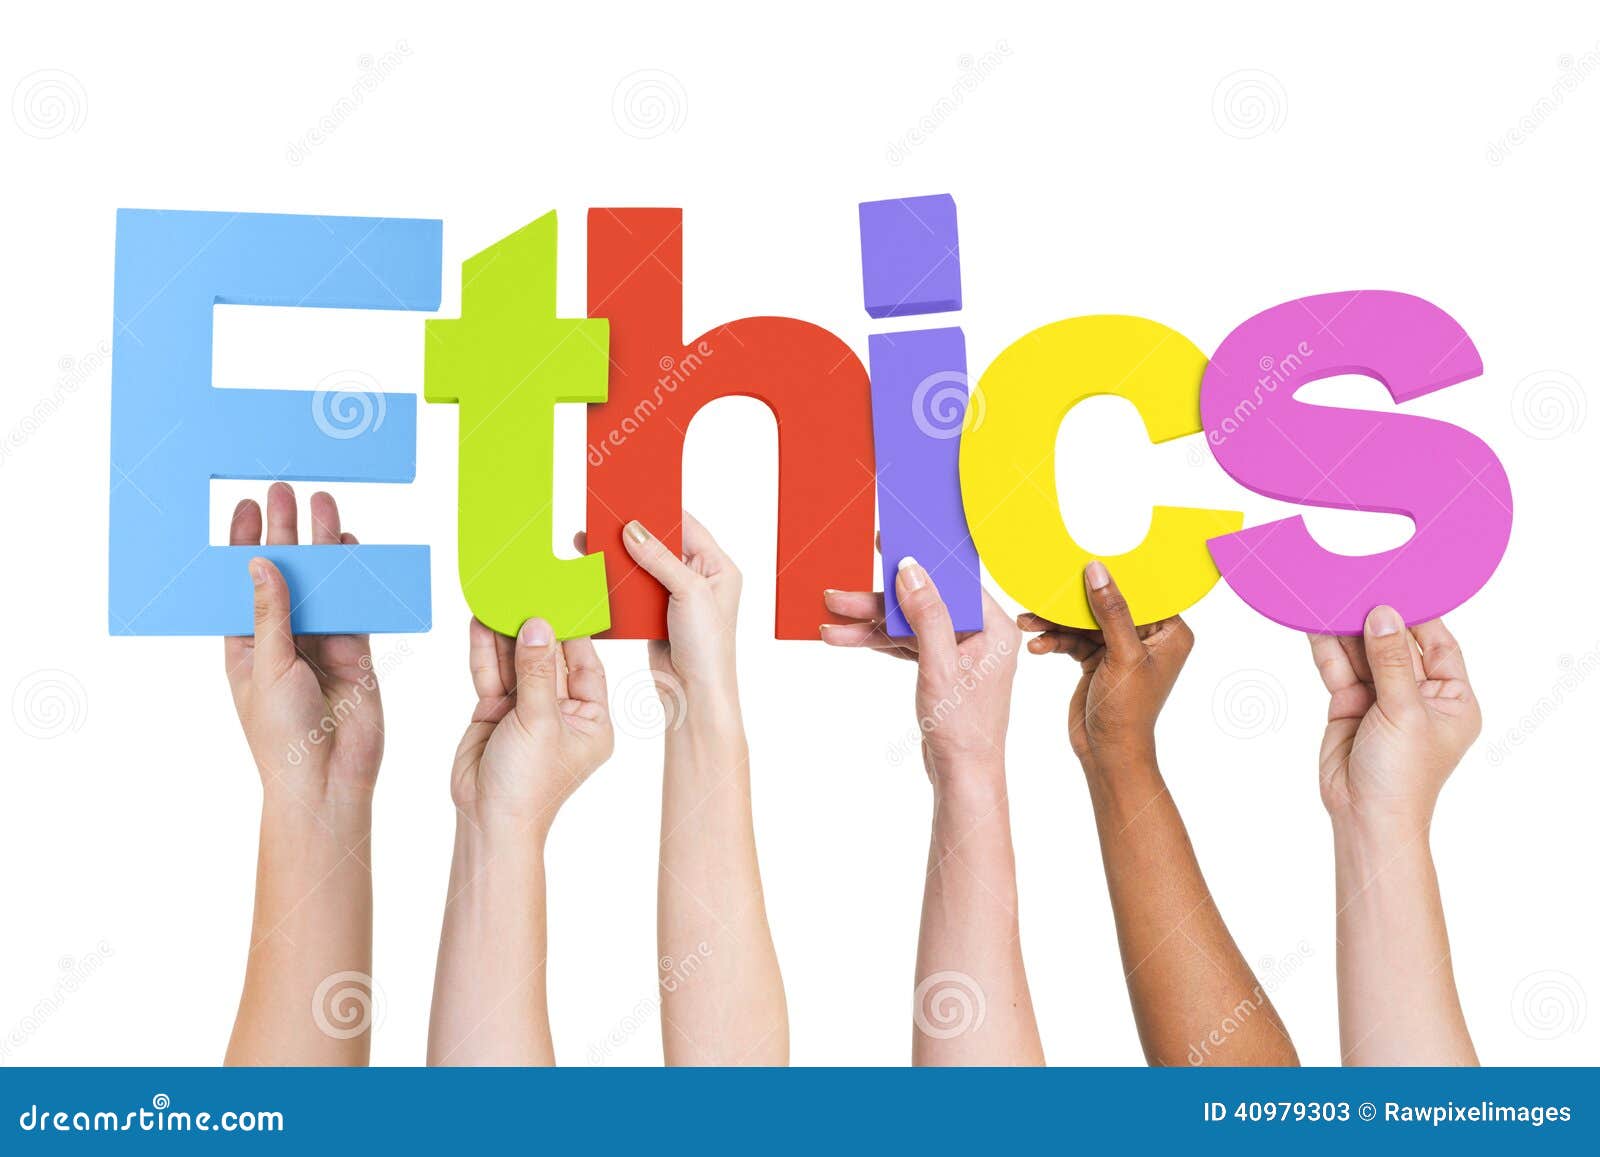 diverse hands holding the word ethics